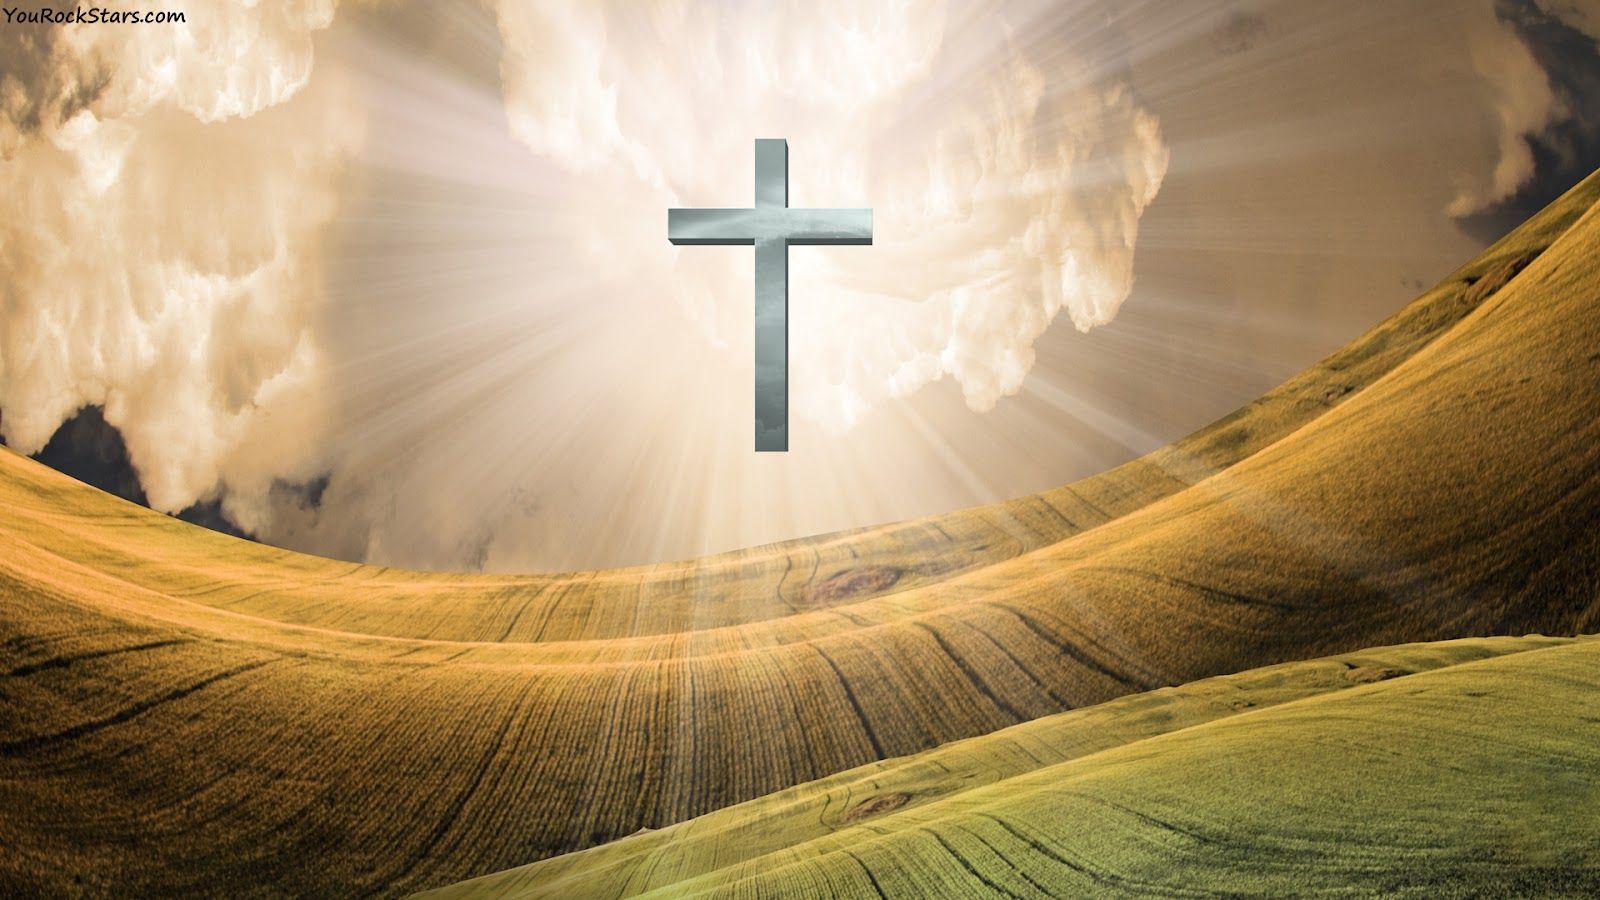 High Definition Collection: Jesus Christ Wallpaper, 39 Full HD